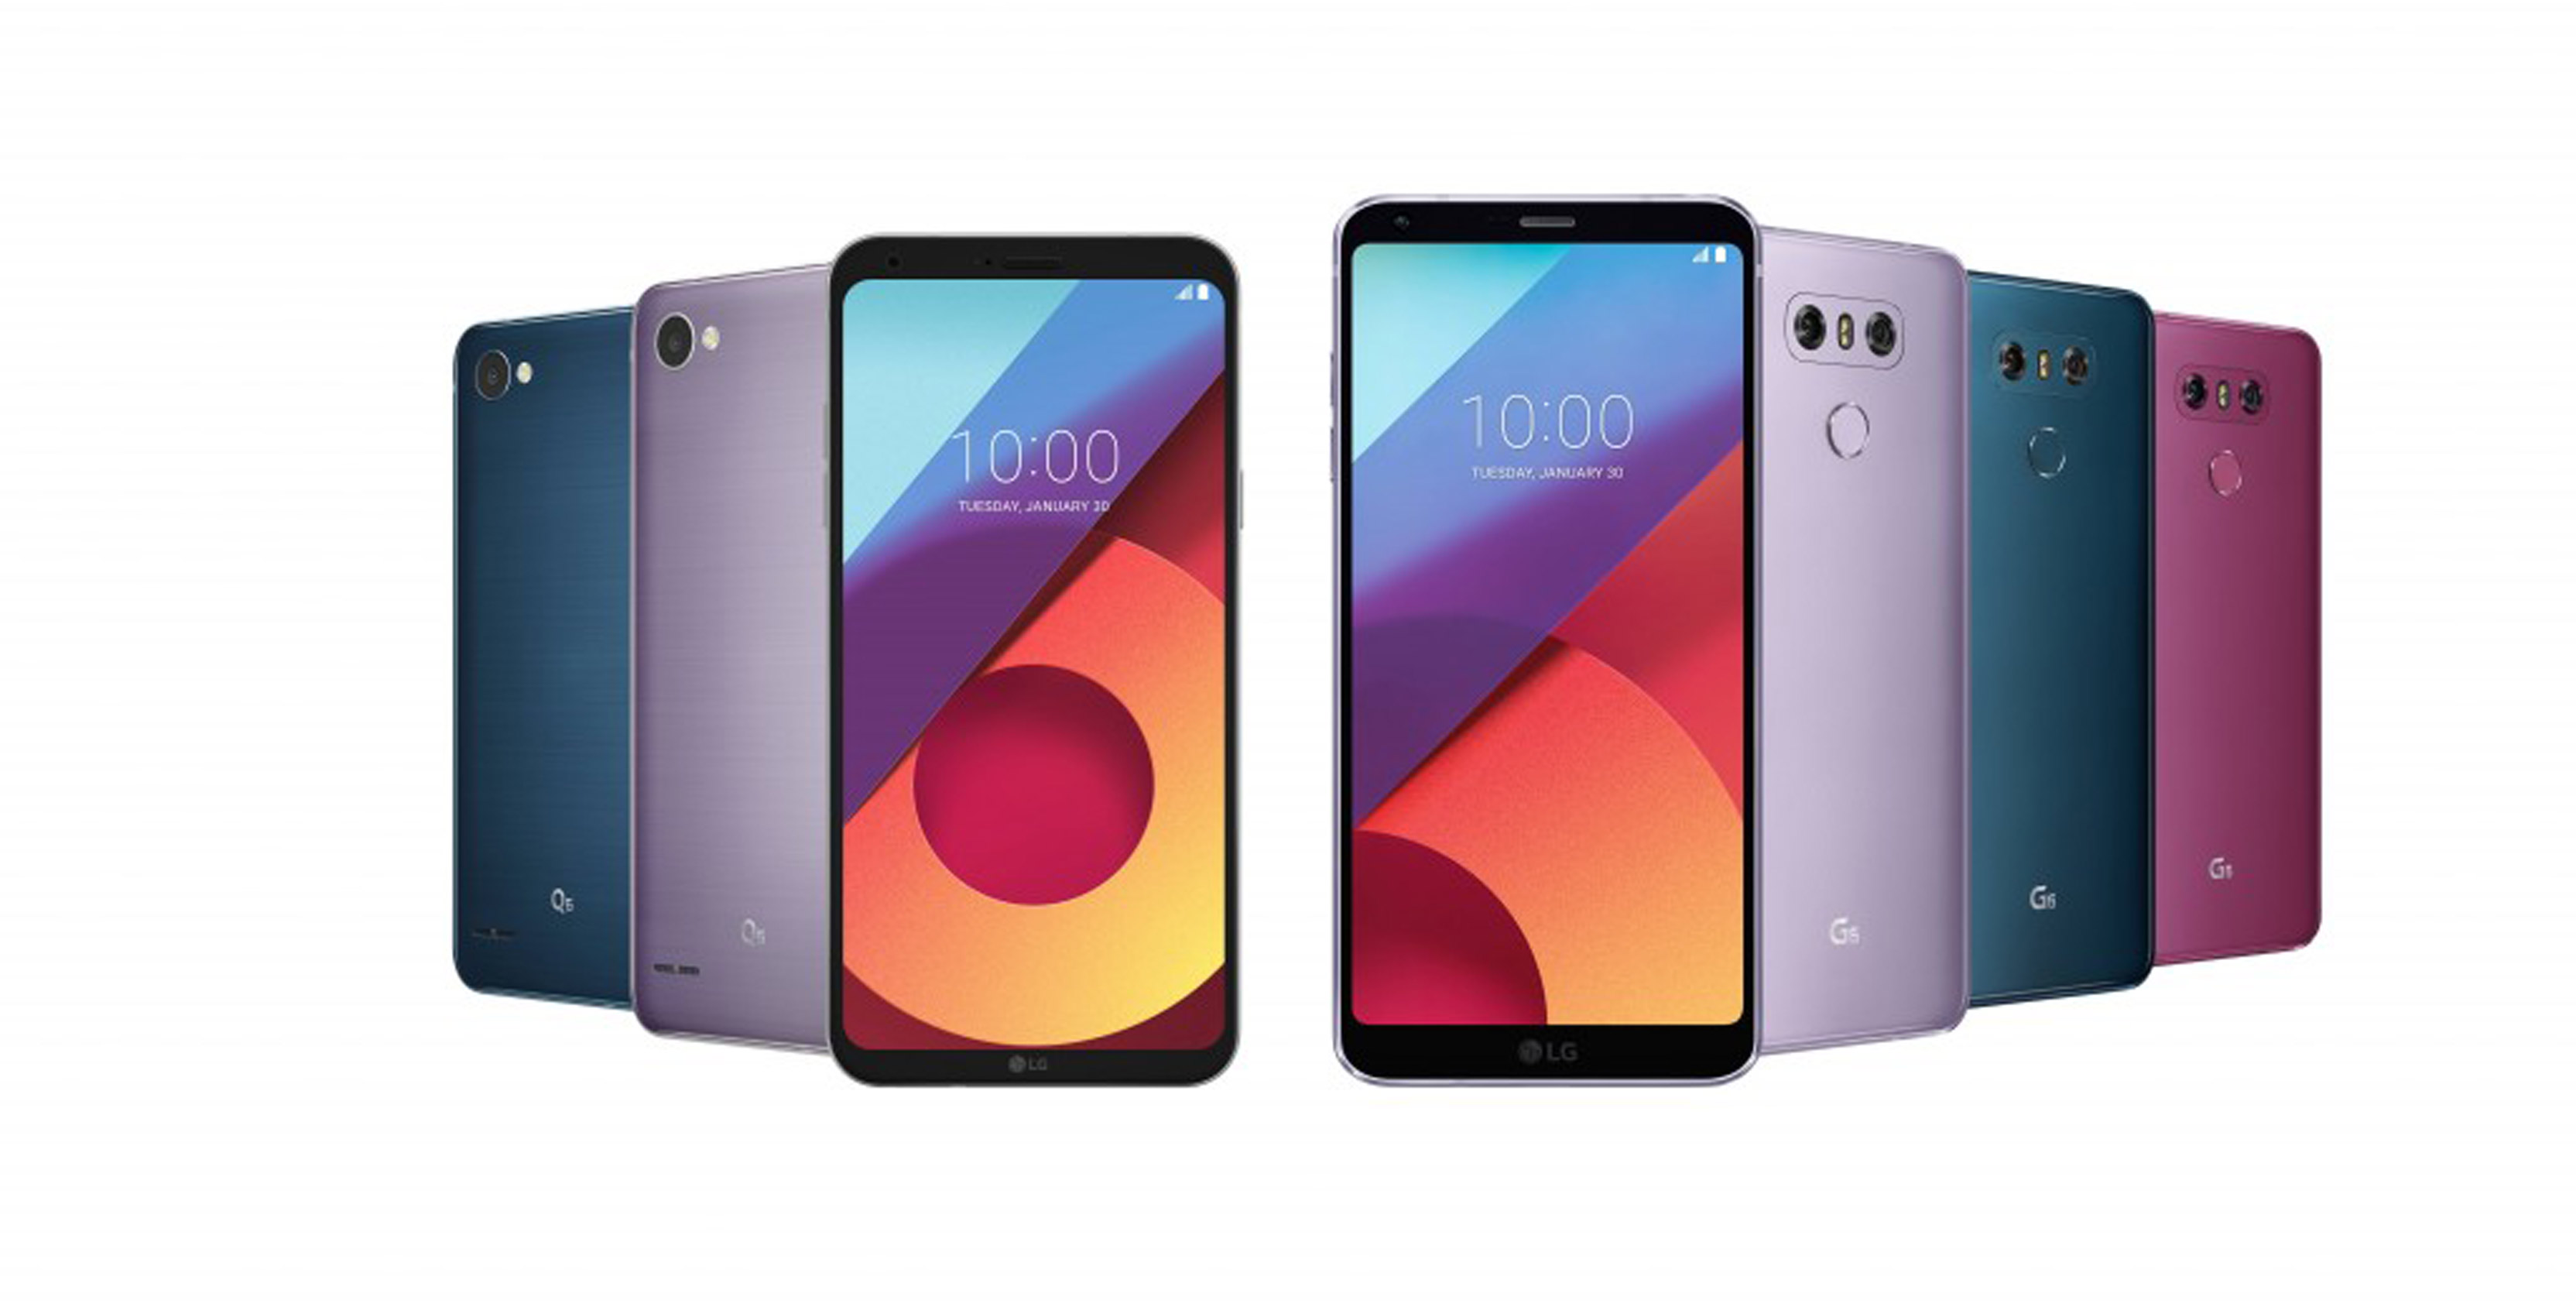 The LG G6 will be available in three new colours, while the Q6 will be available in two new colours